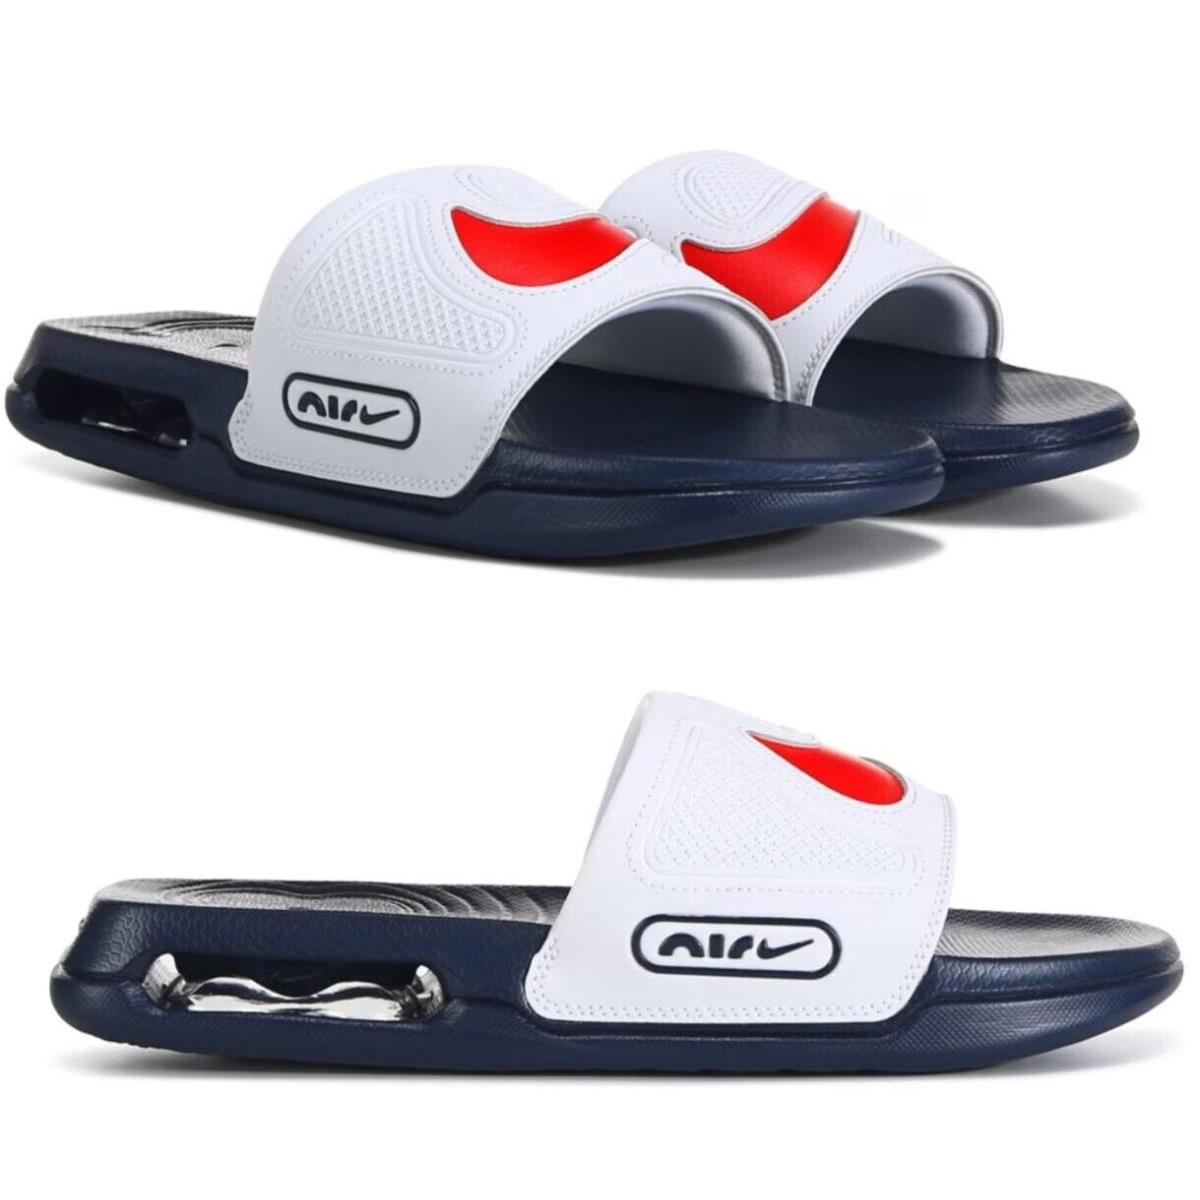 Nike Air Max Cirro Slide Sandals Athletic Mens lt Gray Navy Red All Sizes